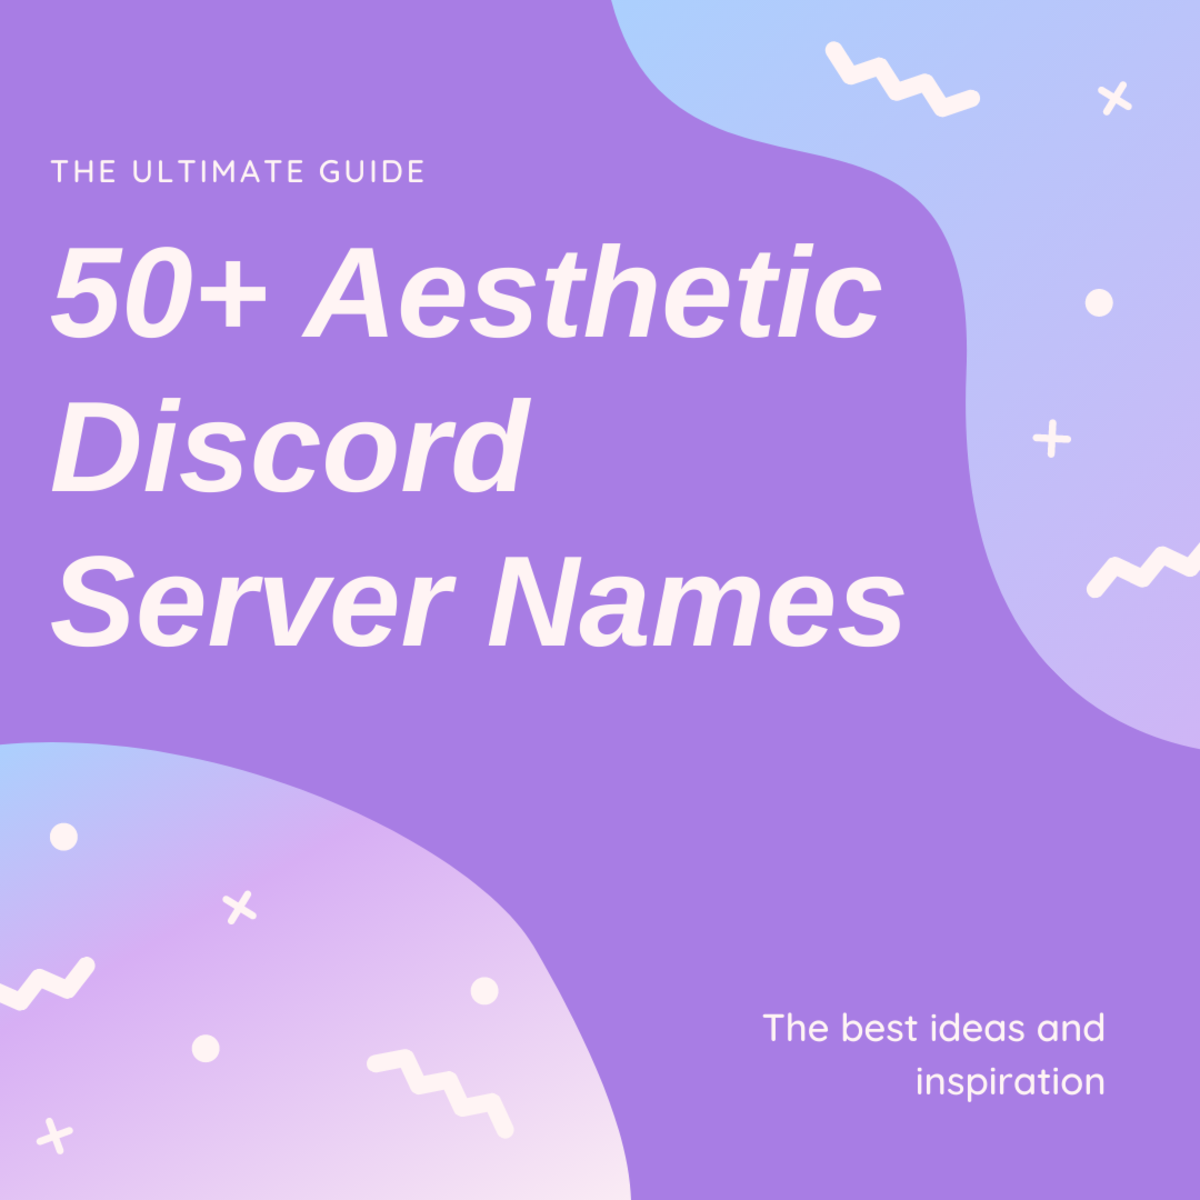 Discover over 50 aesthetic Discord server names, plus lots of inspiration in this ultimate list!